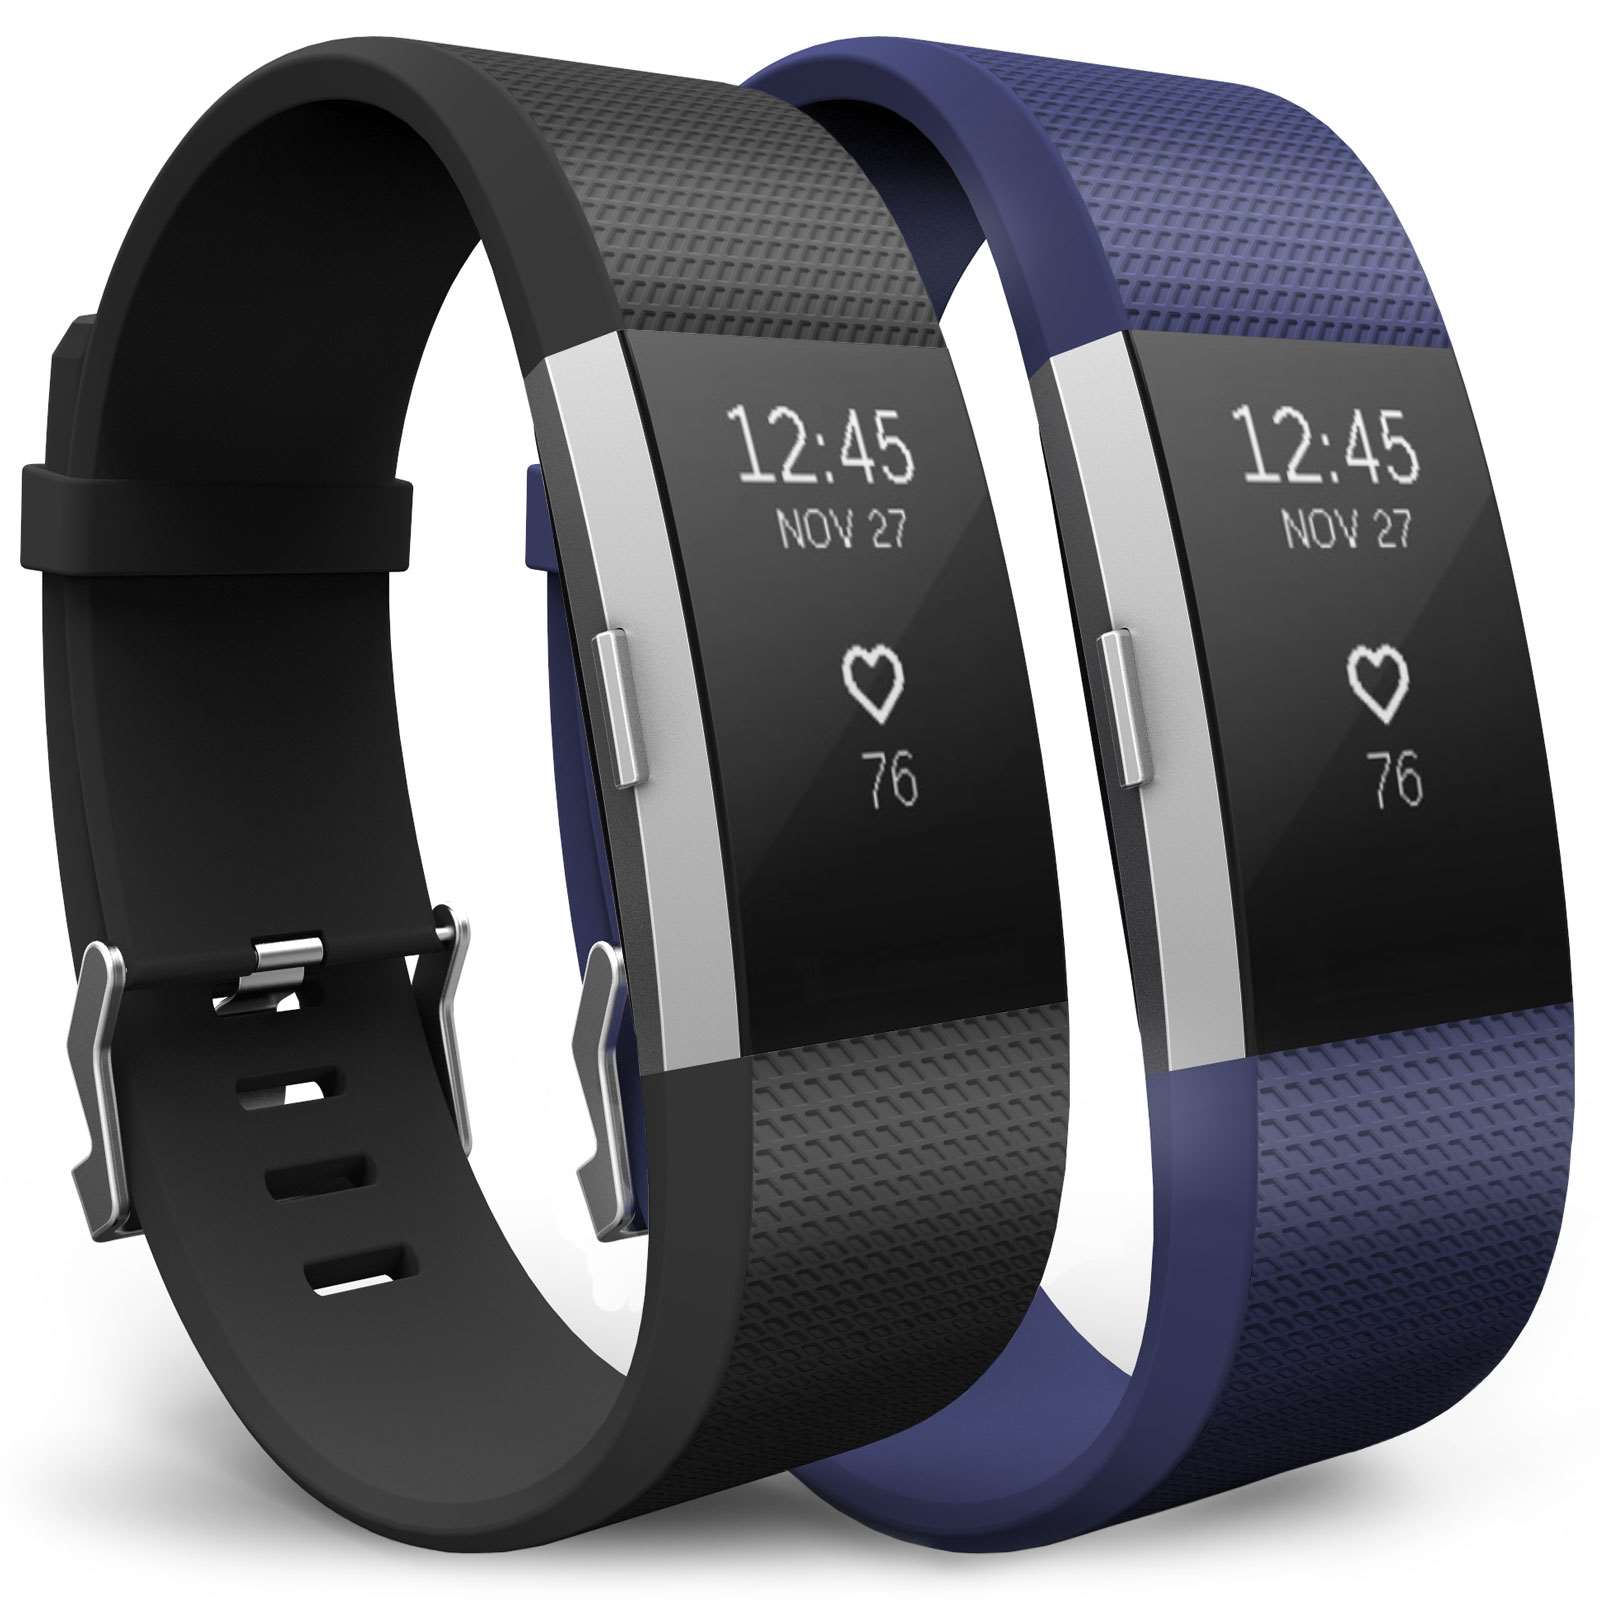 YouSave Fitbit Charge 2 Strap 2-Pack (Large) - Black/Blue